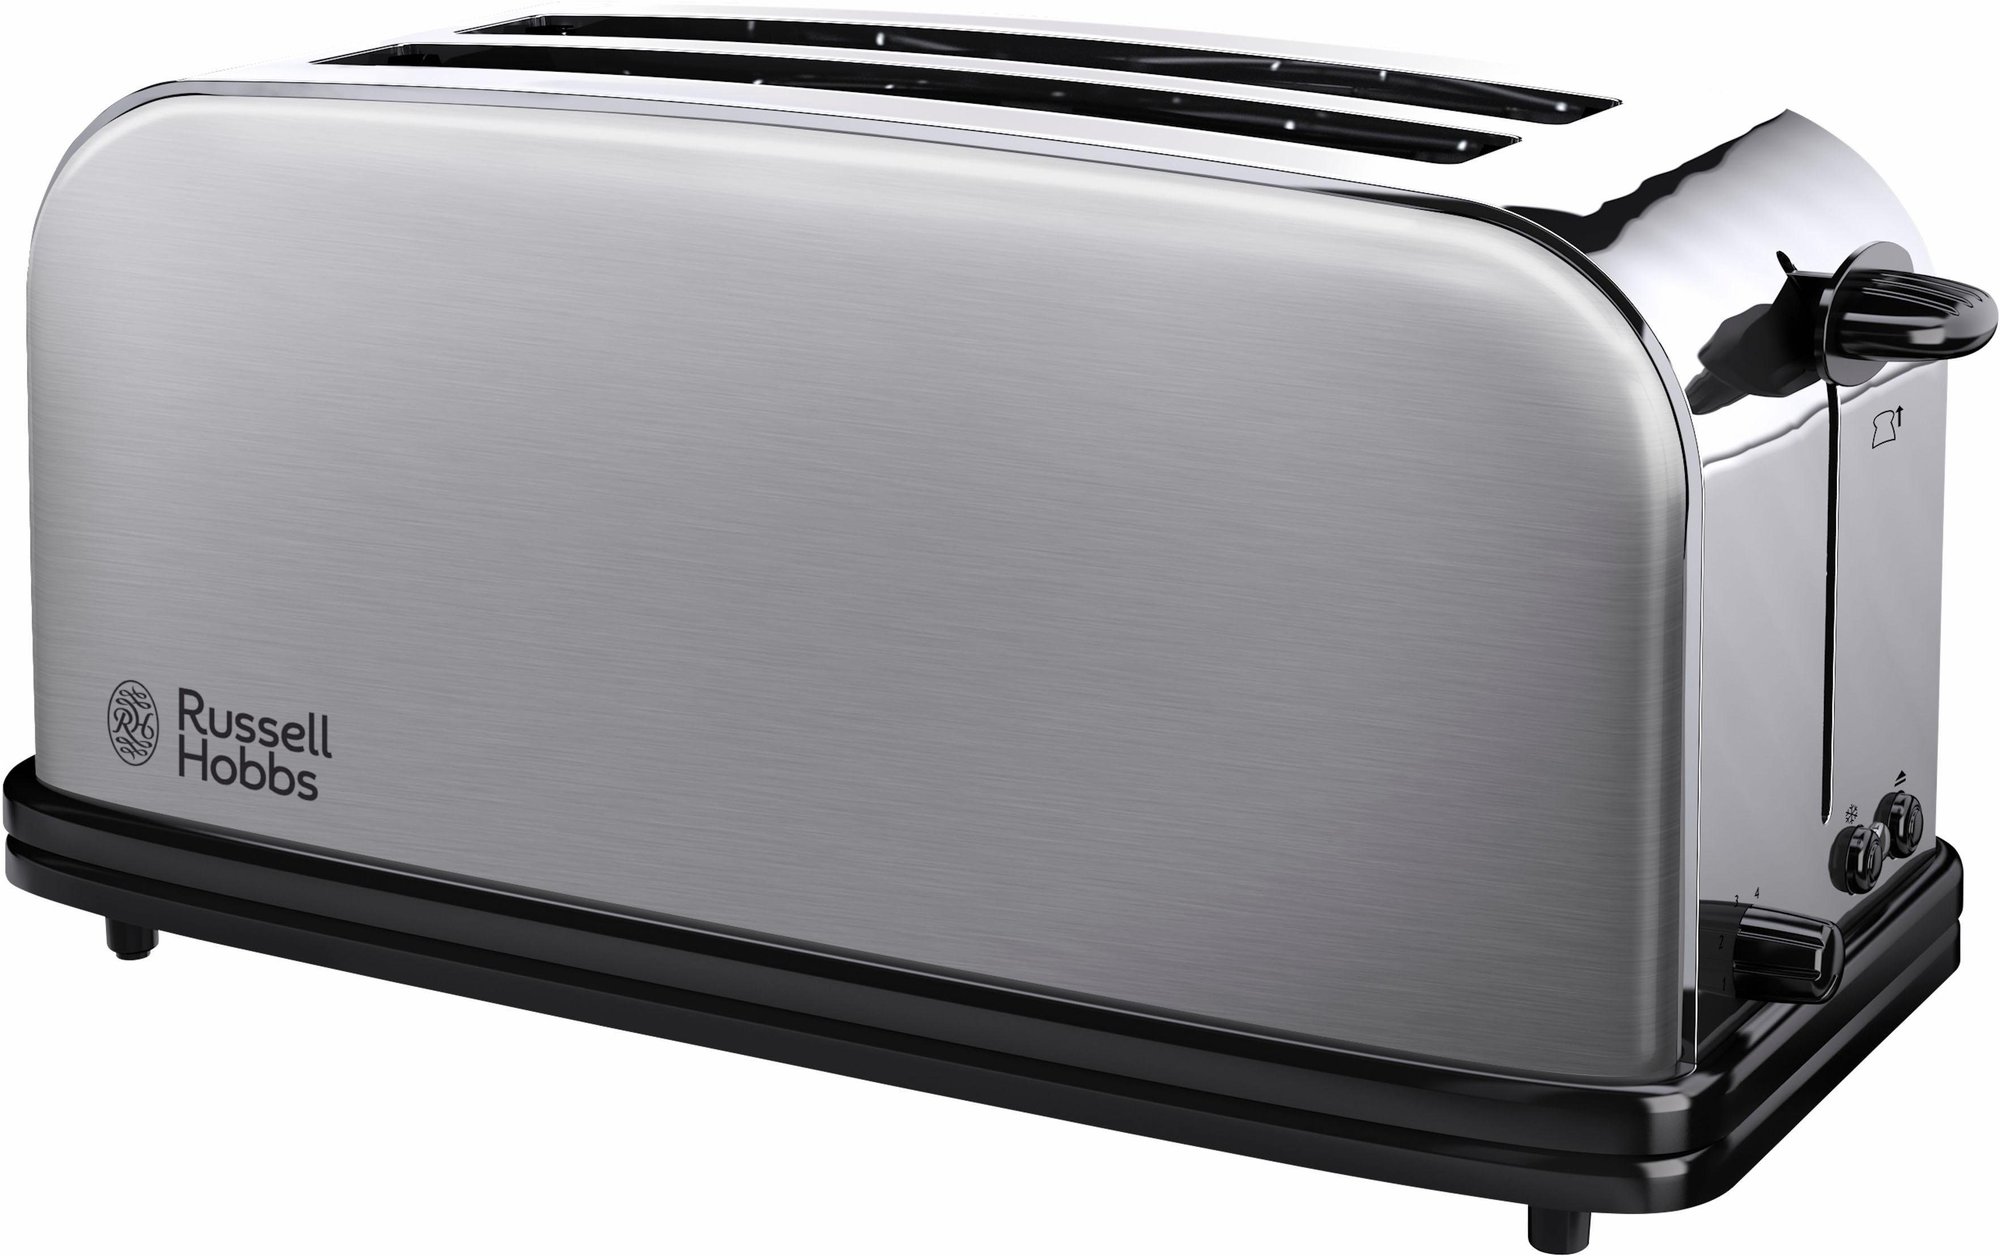 Oxford Russell Hobbs € Test TOP 2023) 23610-56 ab Angebote 42,00 (Dezember